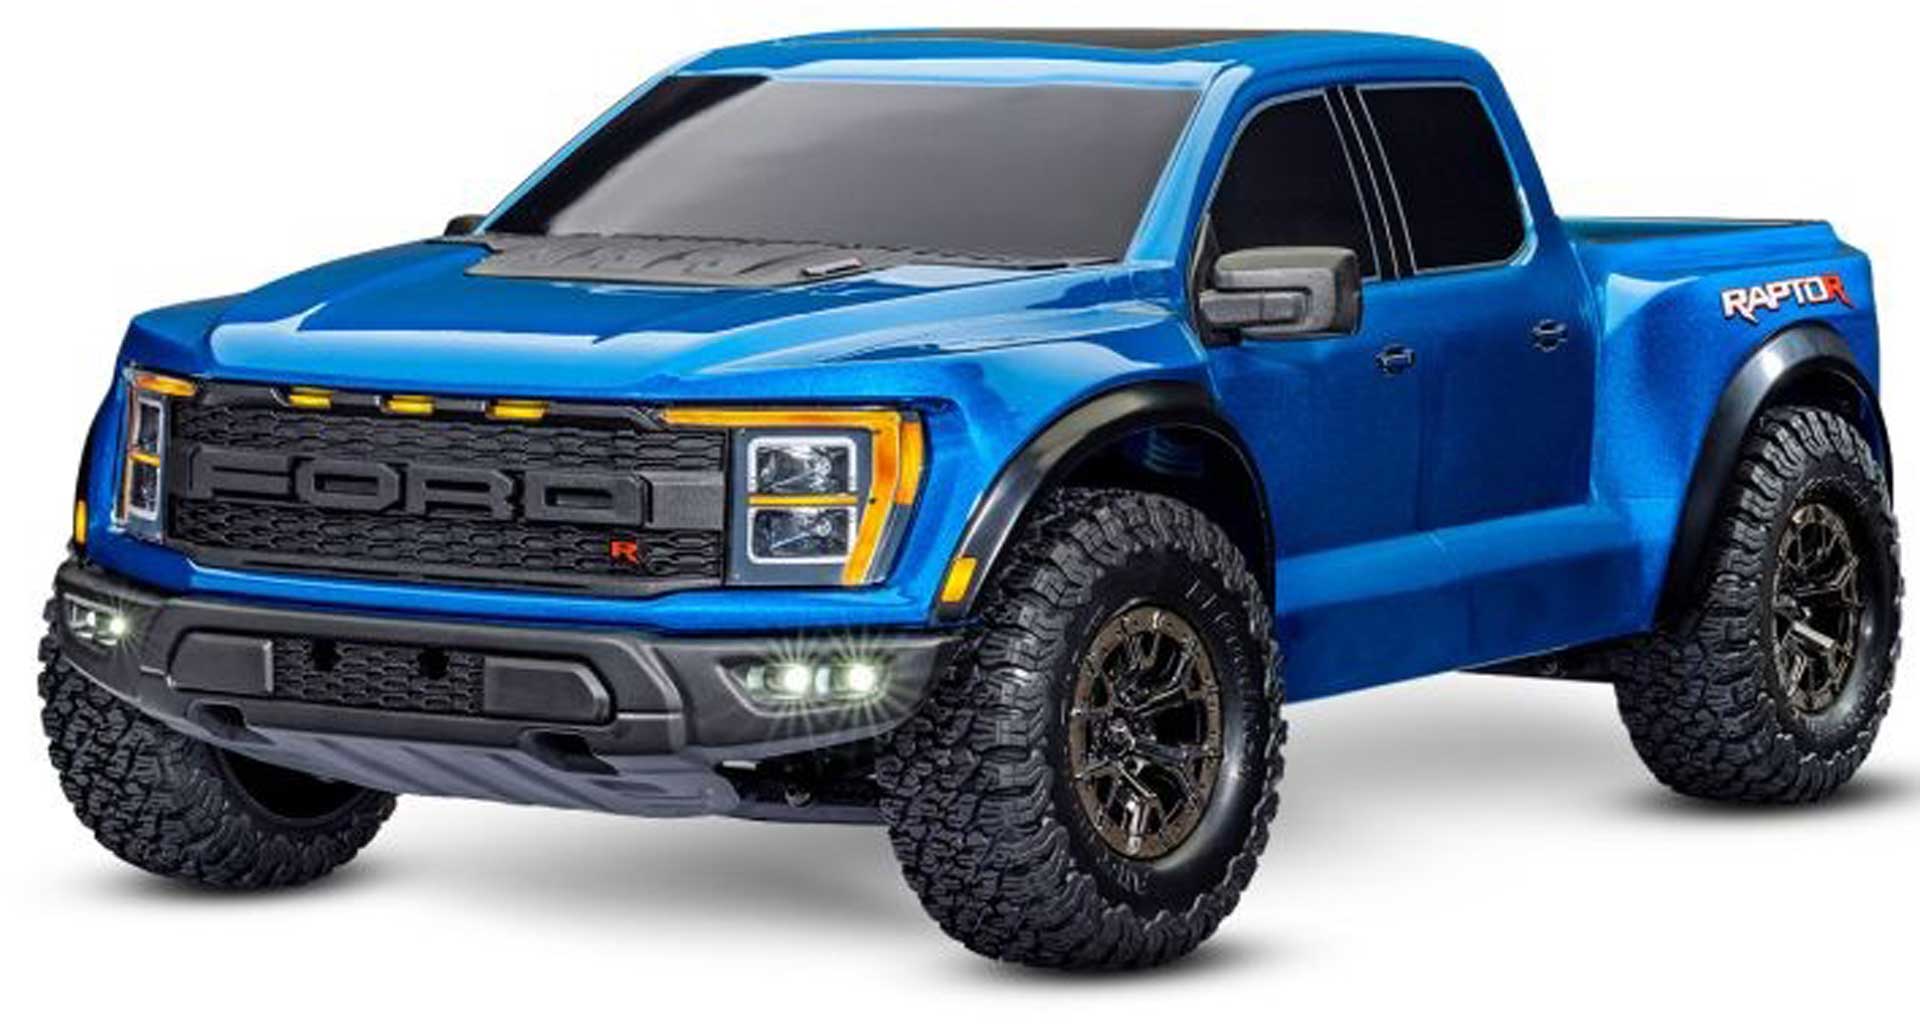 TRAXXAS FORD RAPTOR-R 4X4 VXL BLEU 1/10 PRO-SCALE RTR BRUSHLESS, SANS ACCU/CHARGEUR